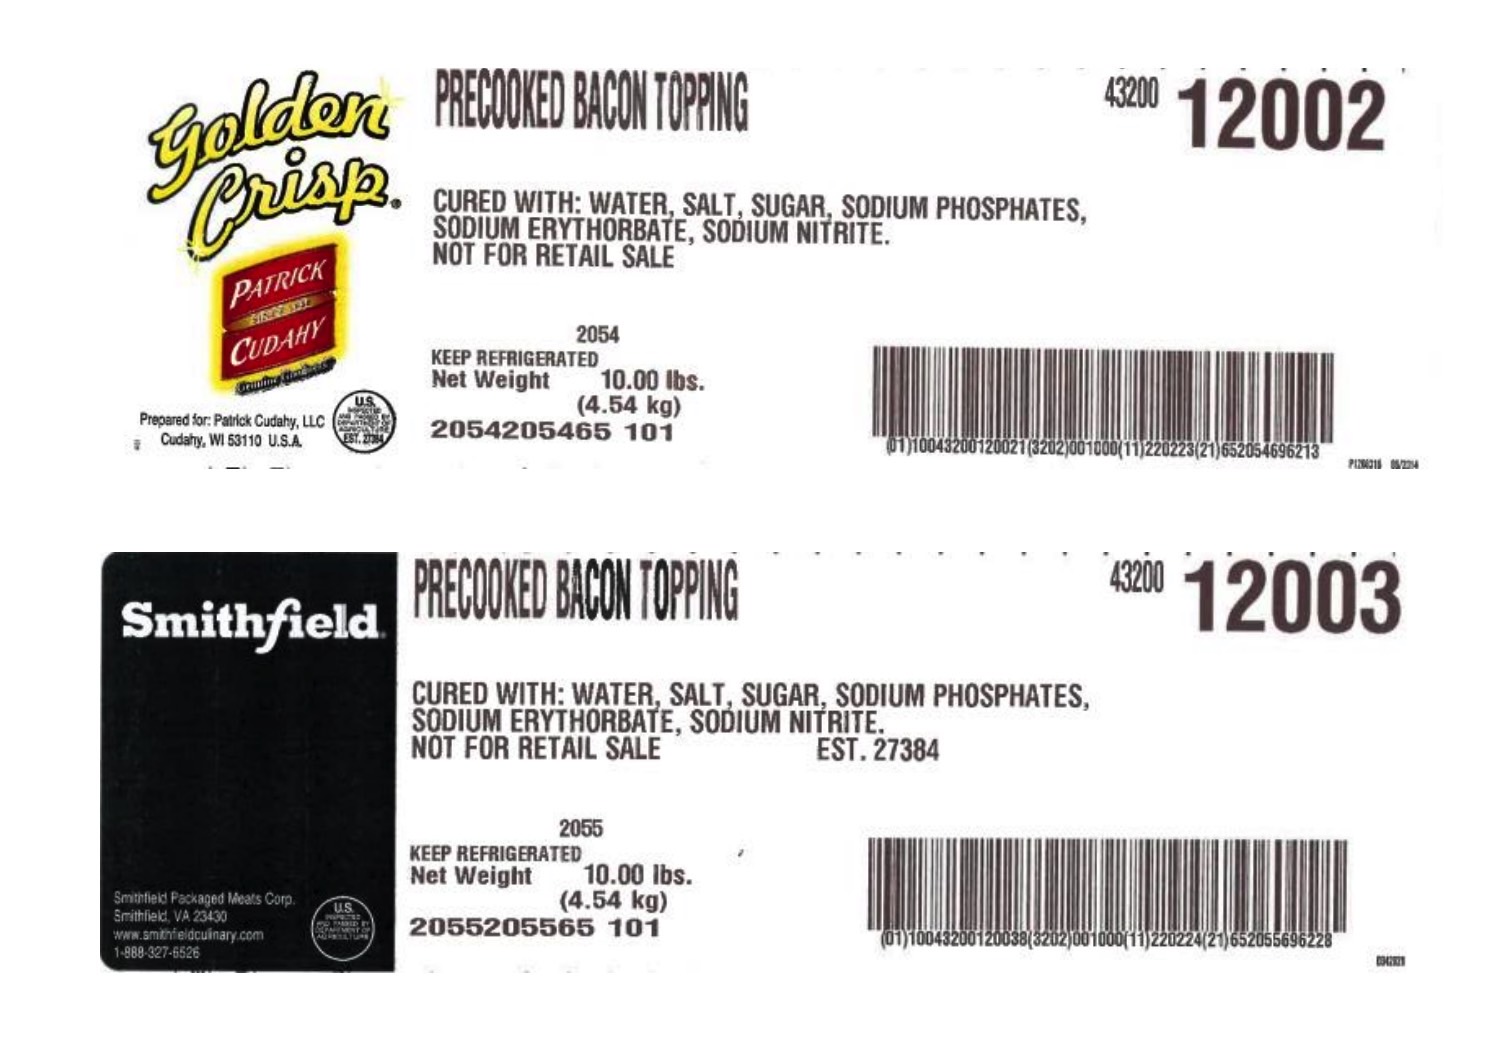 Smithfield bacon recall: Examples of labels.